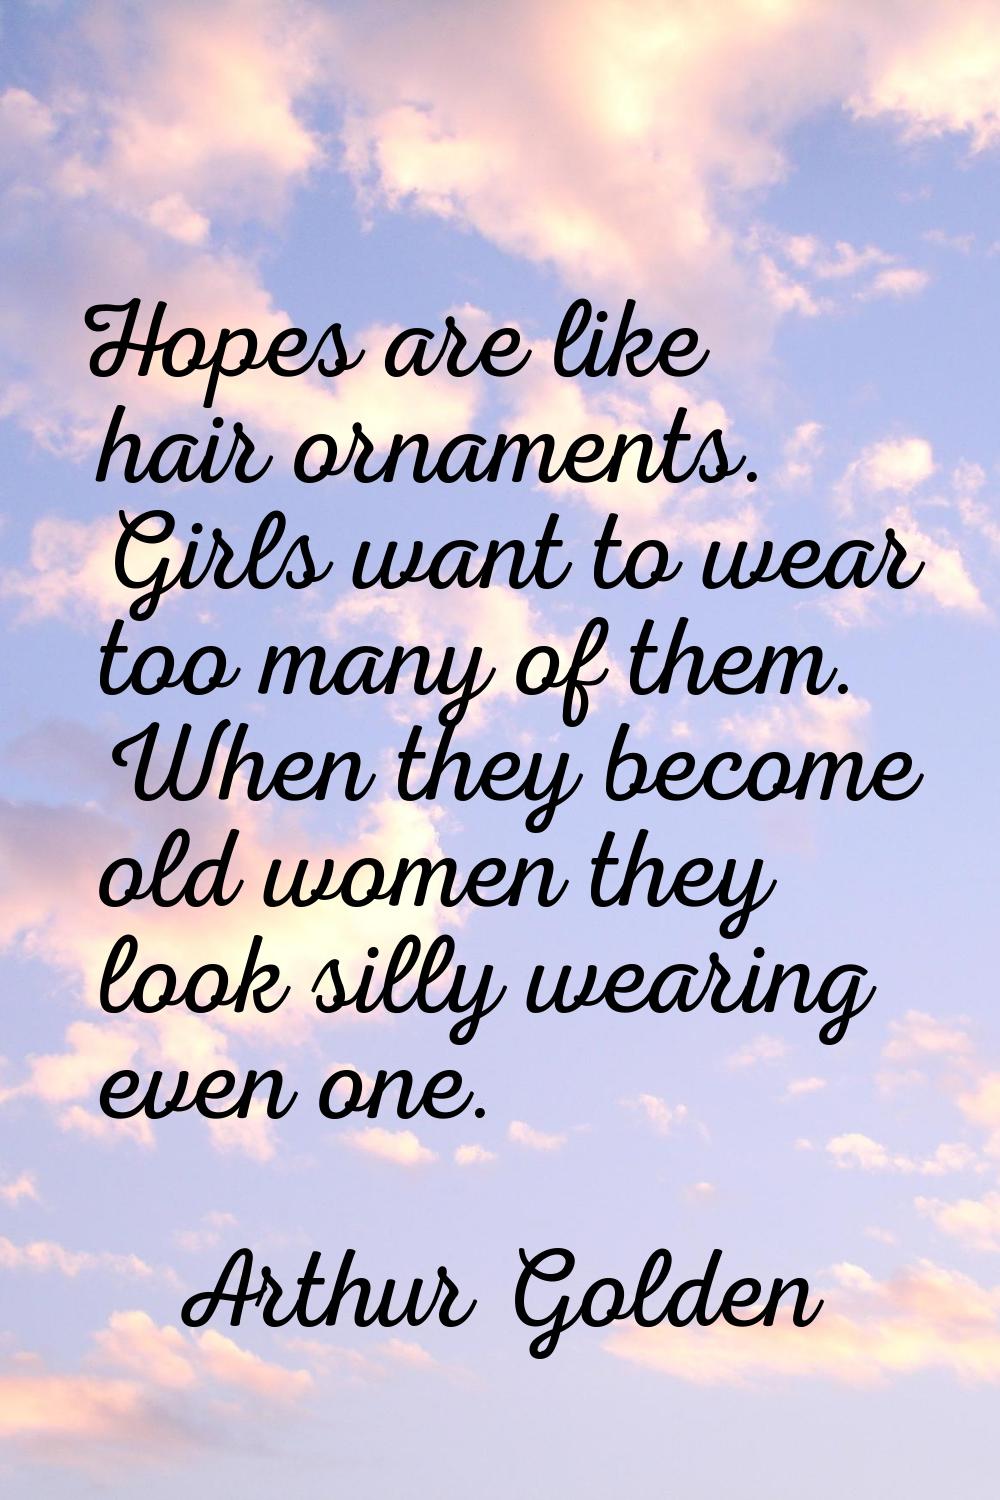 Hopes are like hair ornaments. Girls want to wear too many of them. When they become old women they